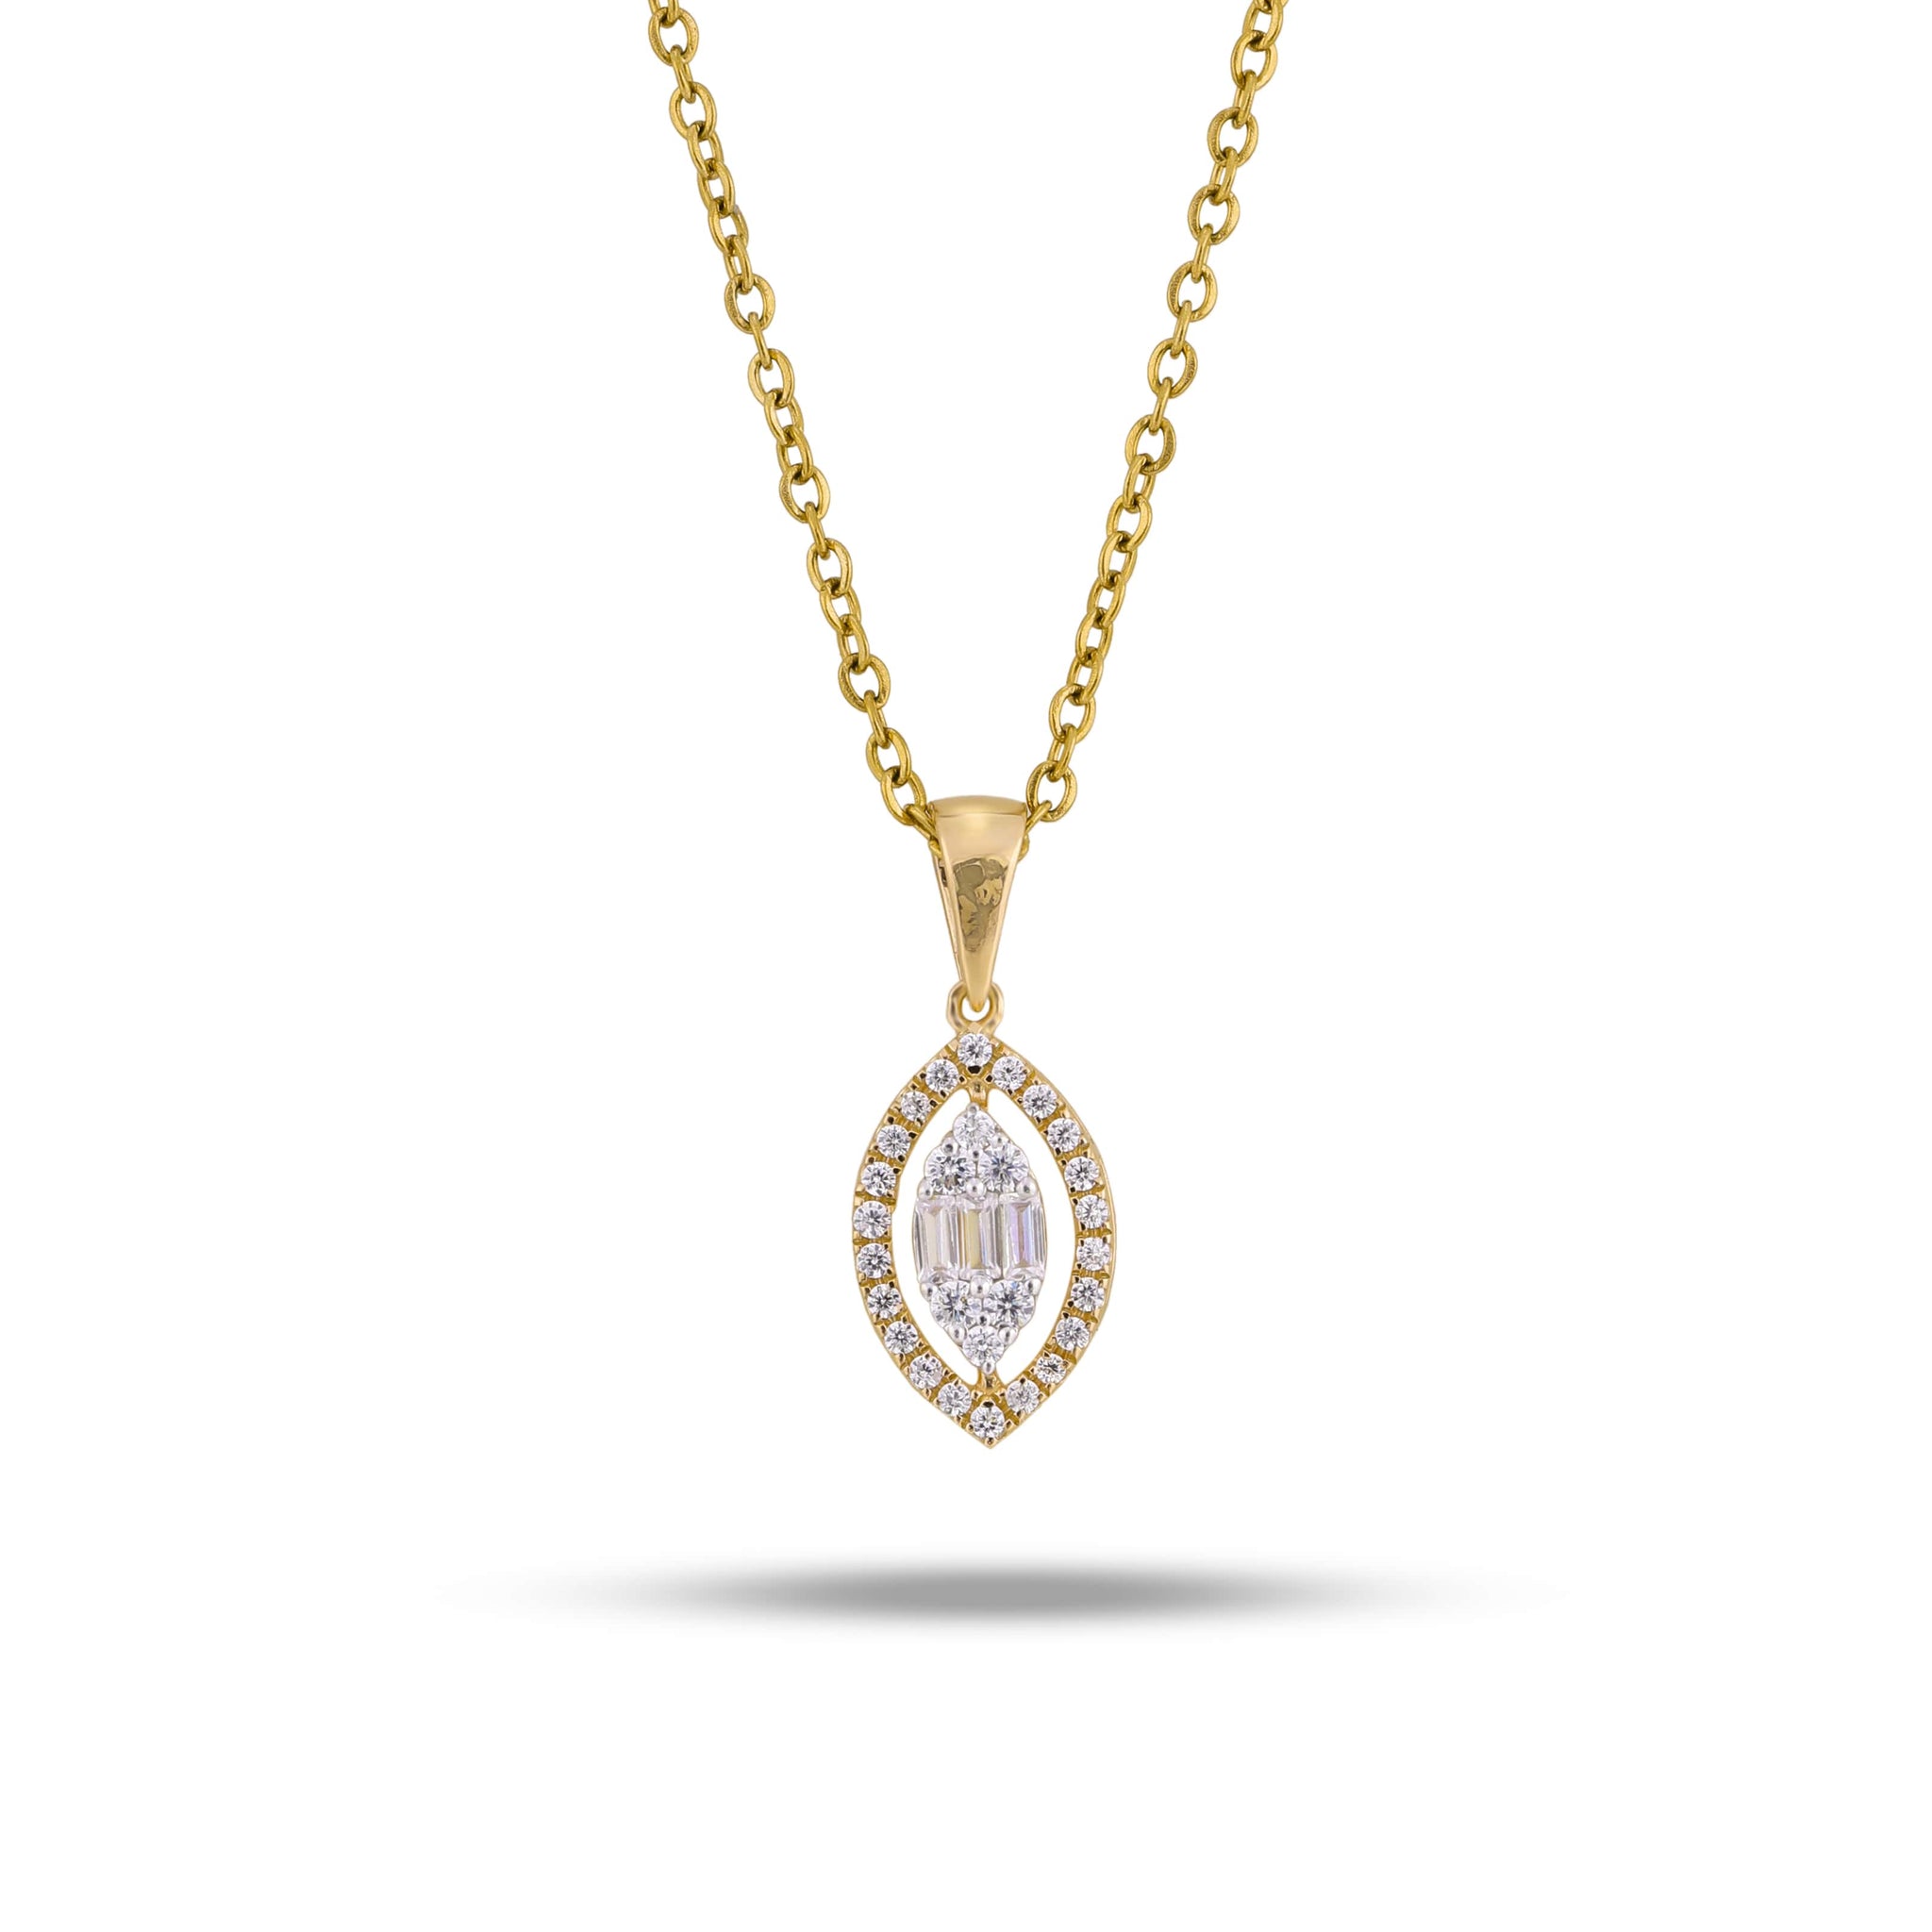 Marquise Diamond Halo Pendant Necklace in yellow gold